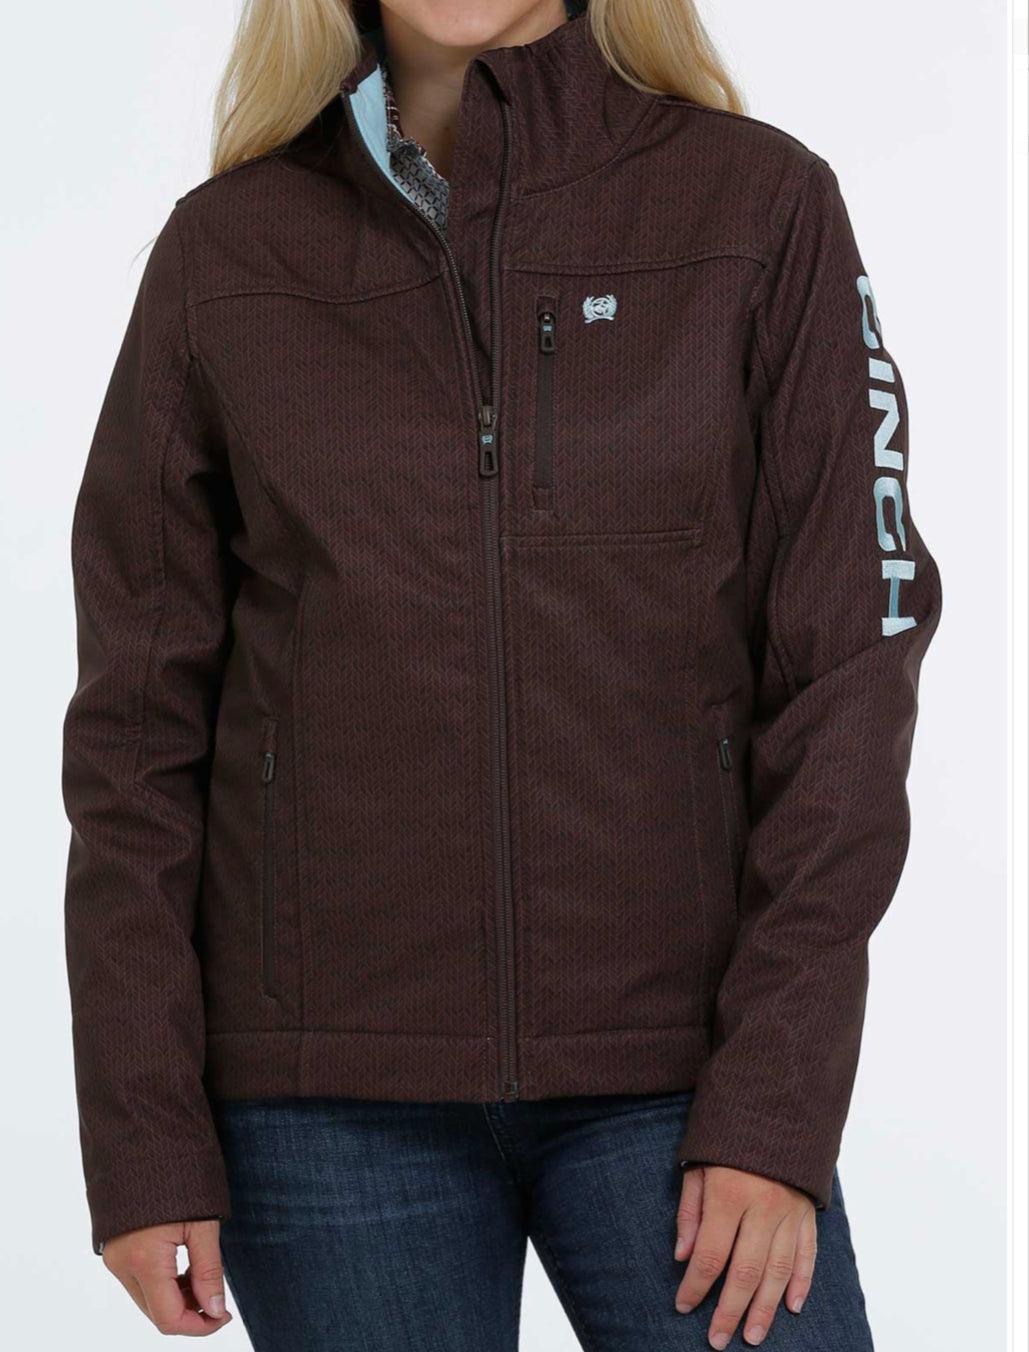 Cinch Jeans  Women's Concealed Carry Bonded Jacket - Brown